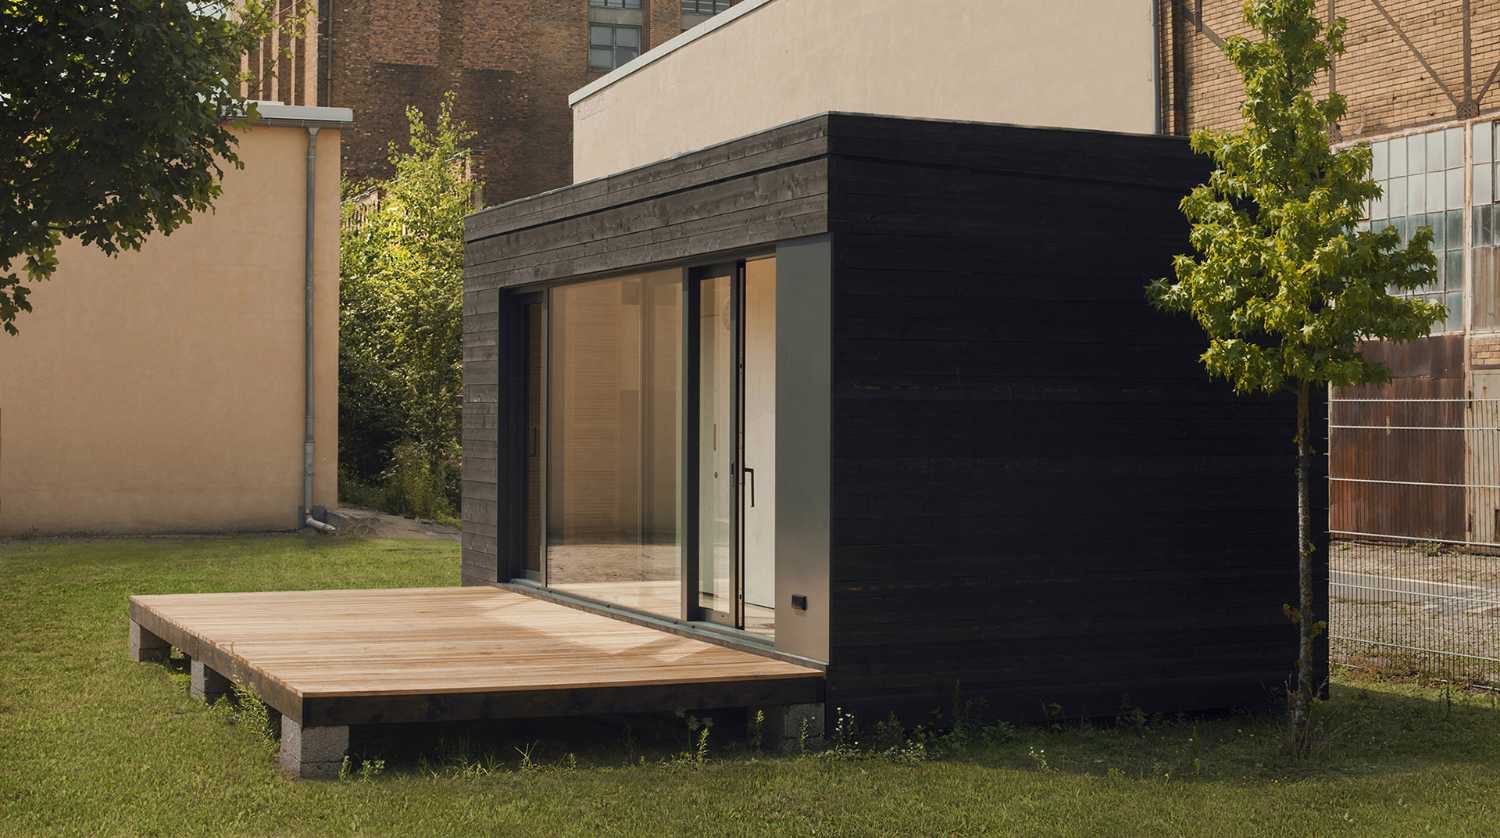 Minimalism and comfort in a modular home. Ecological and sustainable architecture